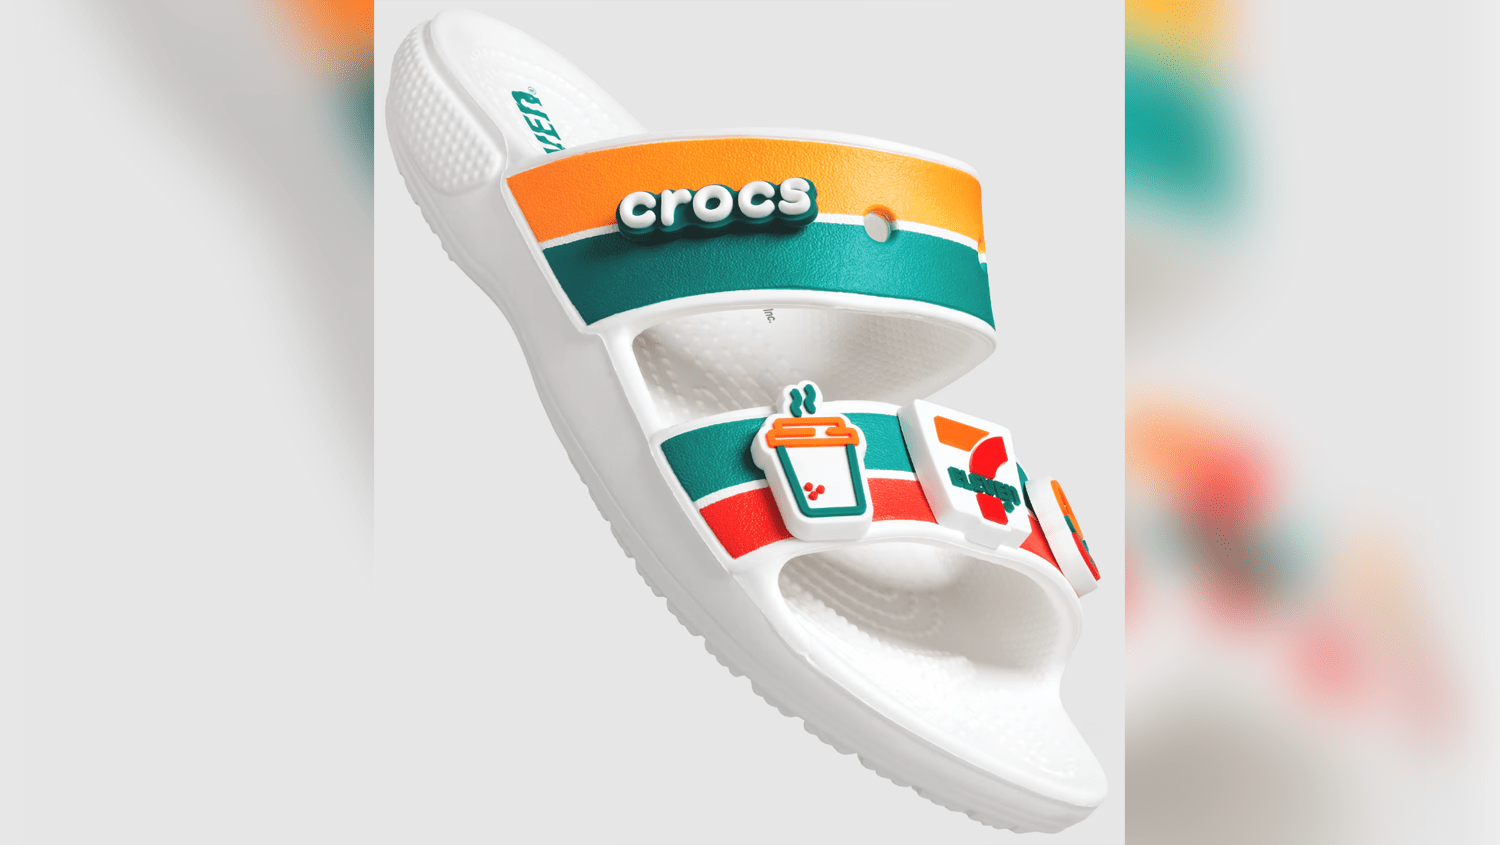 A sandal that is part of the new 7-Eleven x Crocs partnership.